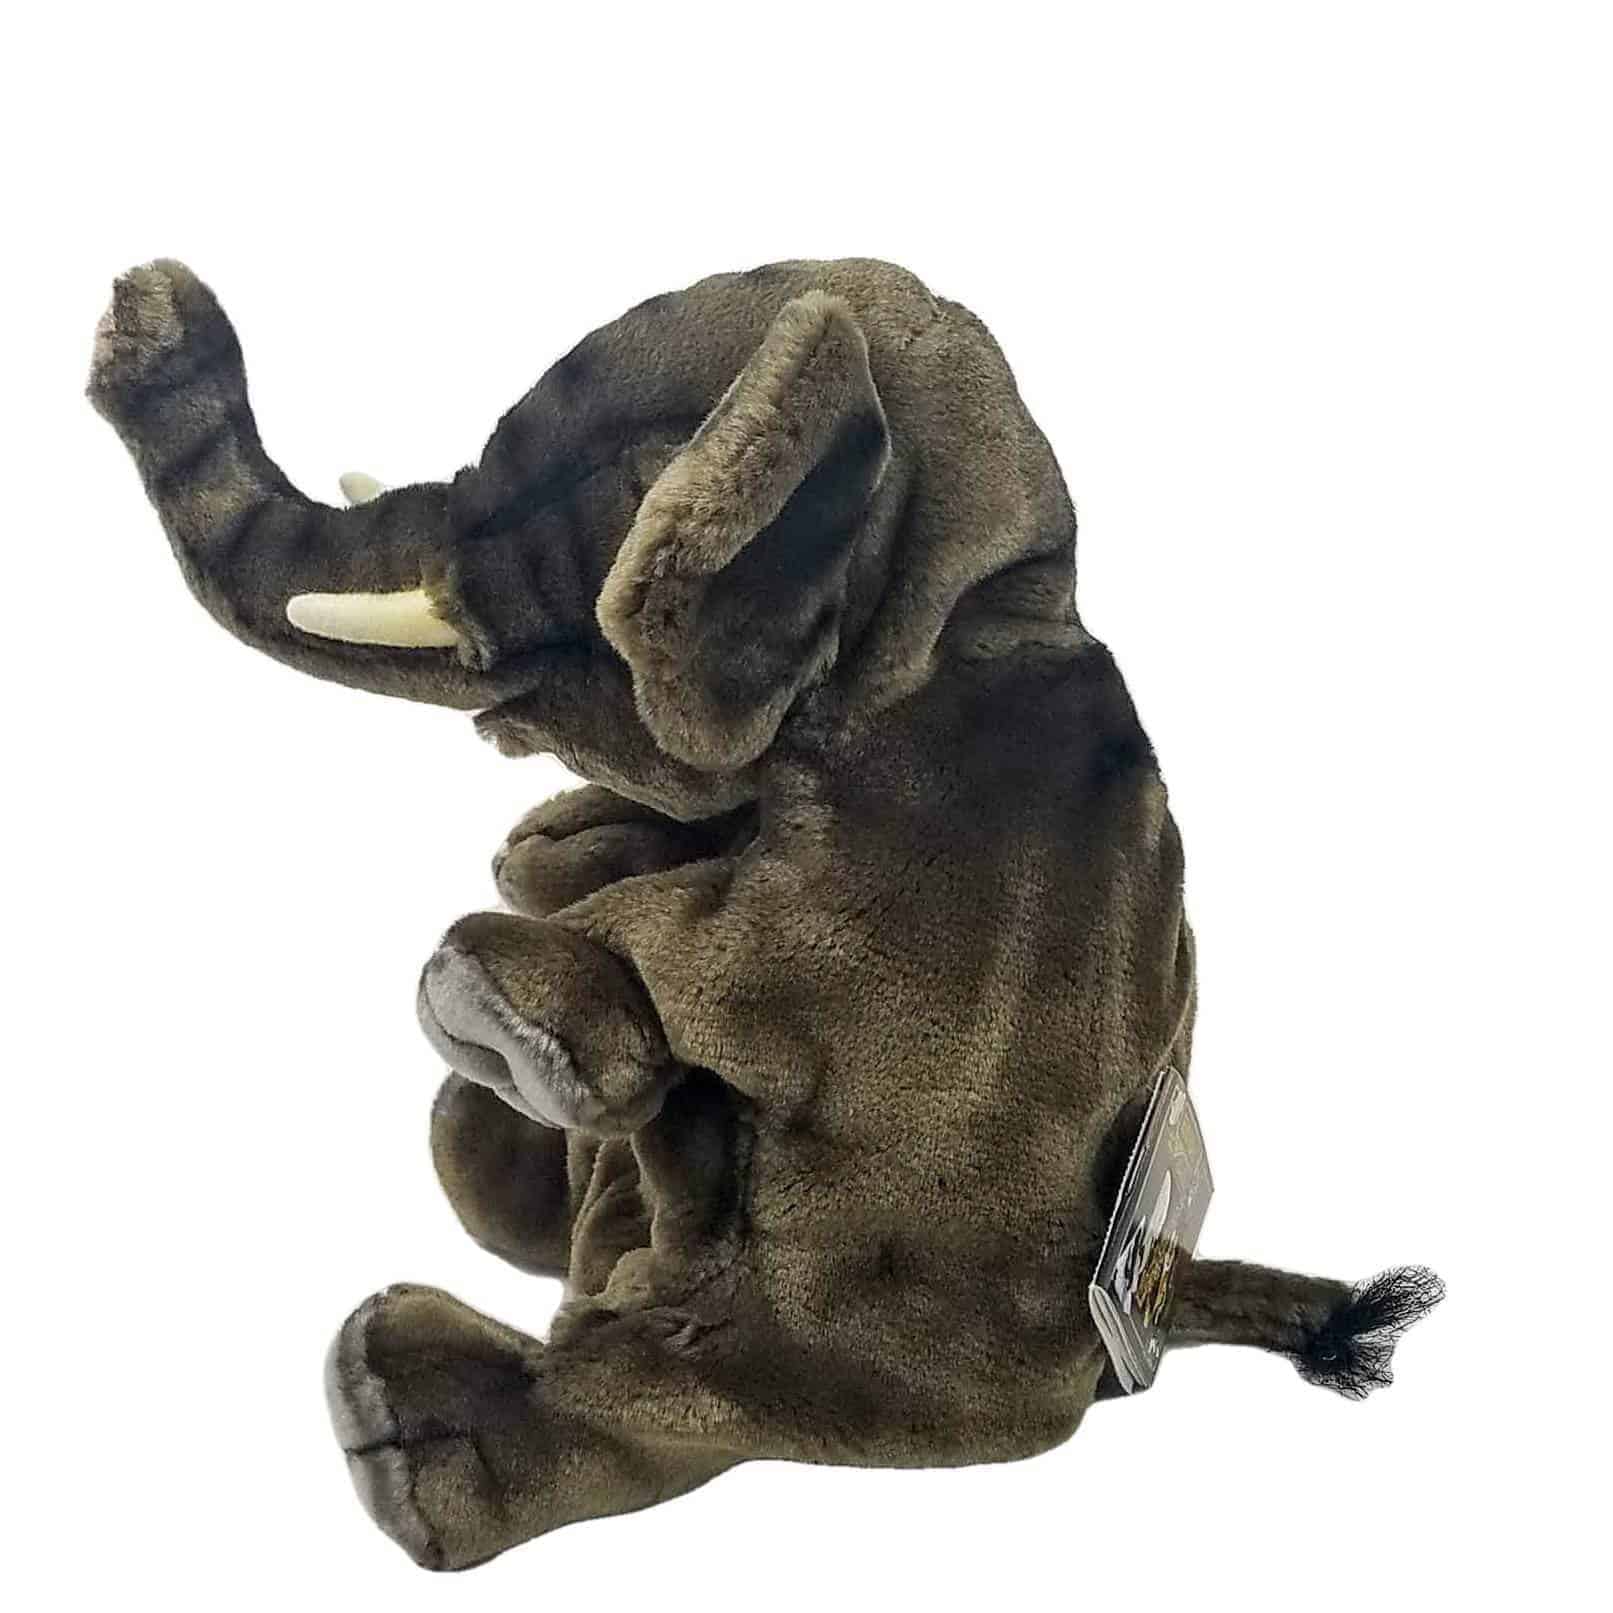 This Elephant Hand Puppet by Hansa True to Life Looking Soft Plush Animal Learning Toy is made with love by Premier Homegoods! Shop more unique gift ideas today with Spots Initiatives, the best way to support creators.